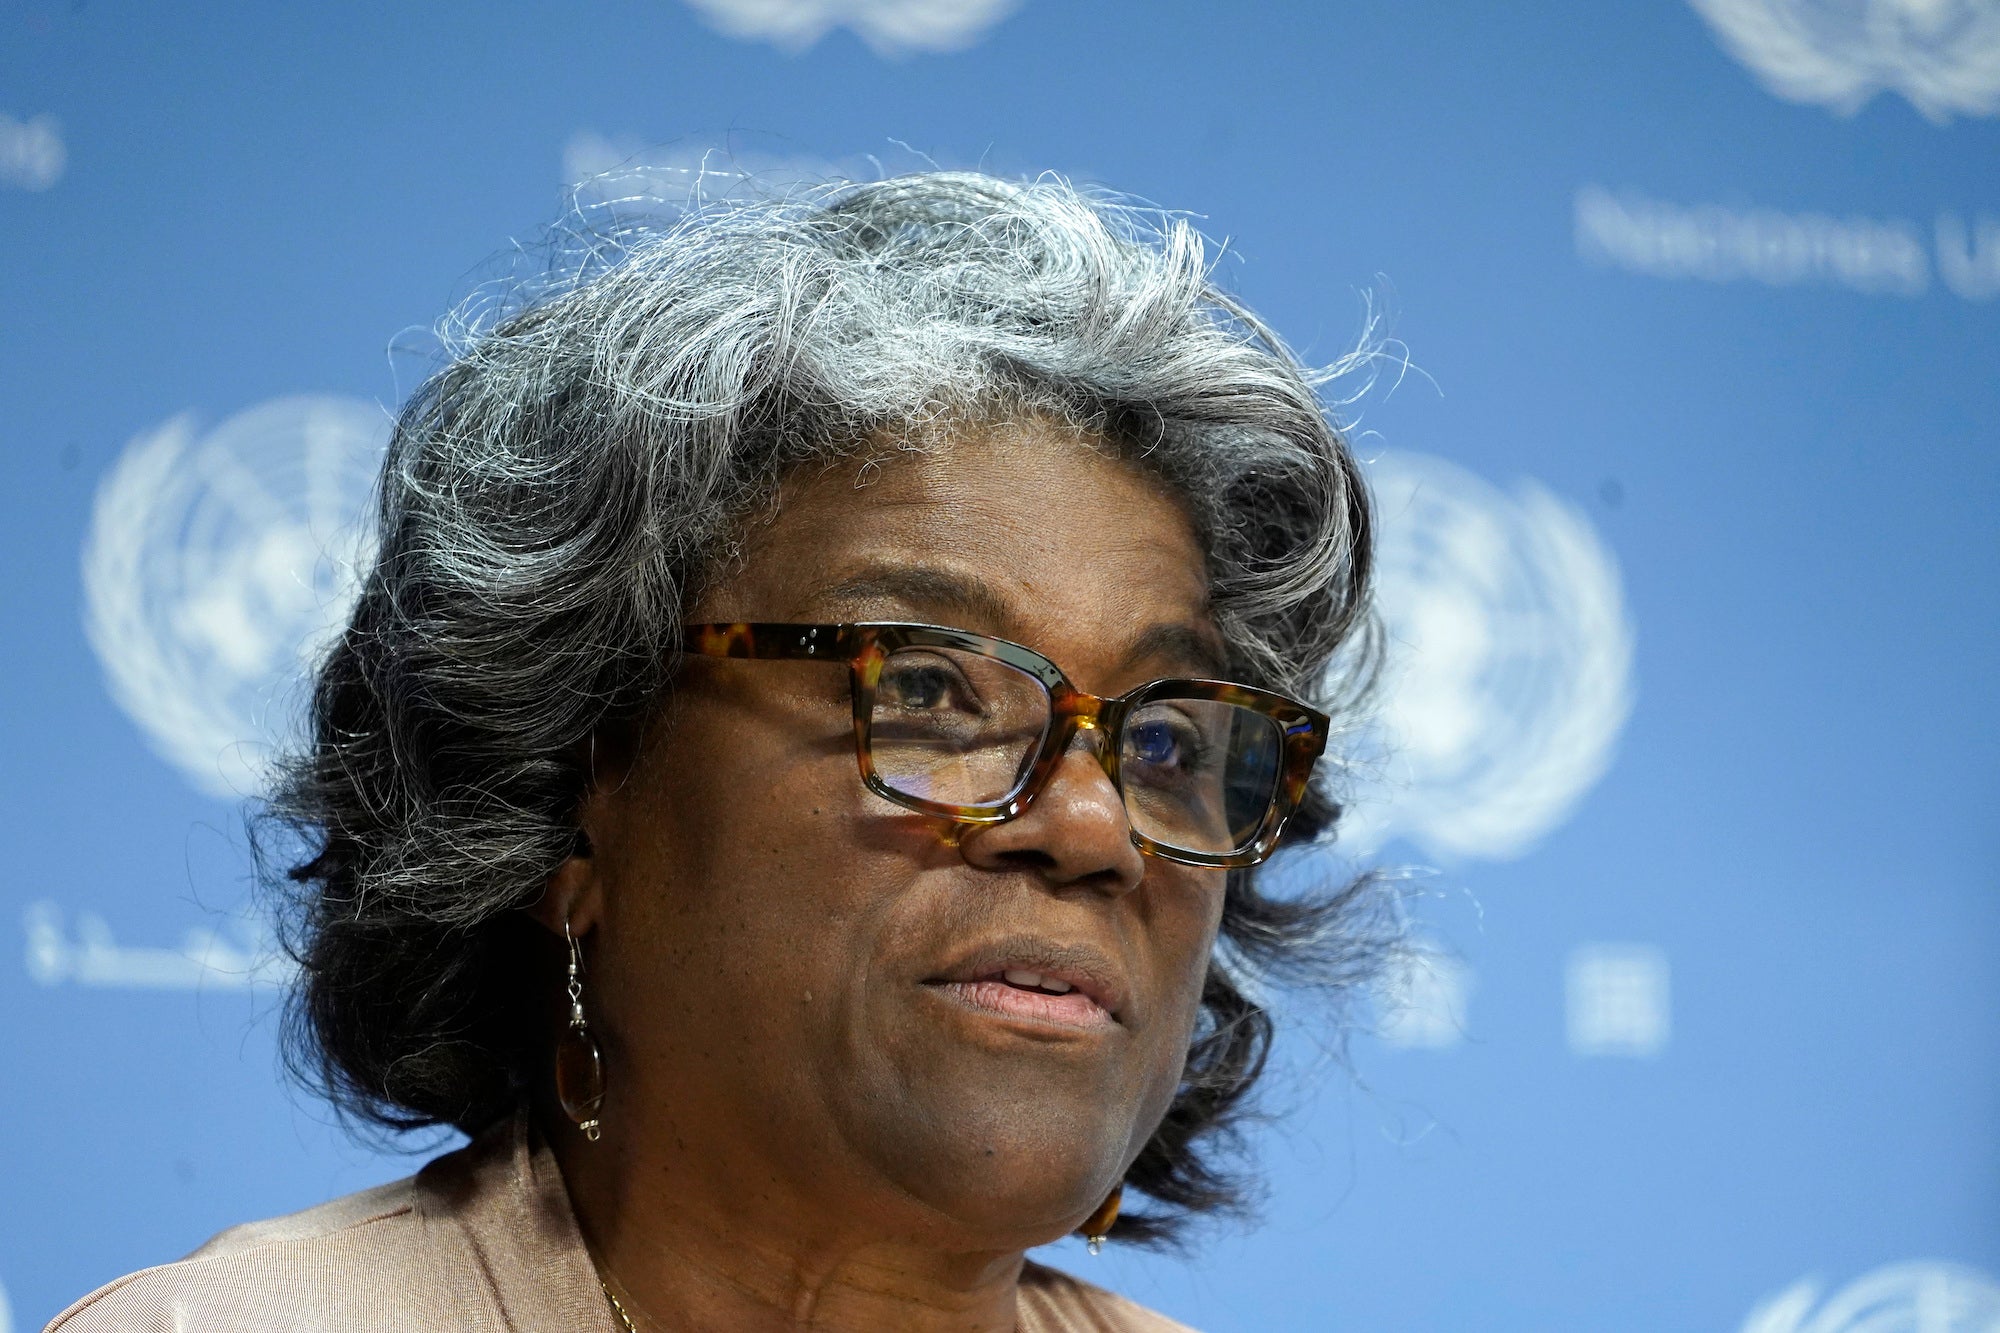 inda Thomas -Greenfield, US Ambassador to the UN, updates the press on her agenda as she assumes the presidency of the Security Council for the month of August at the United Nations Hheadquarters on August 1, 2023 in New York City, US.